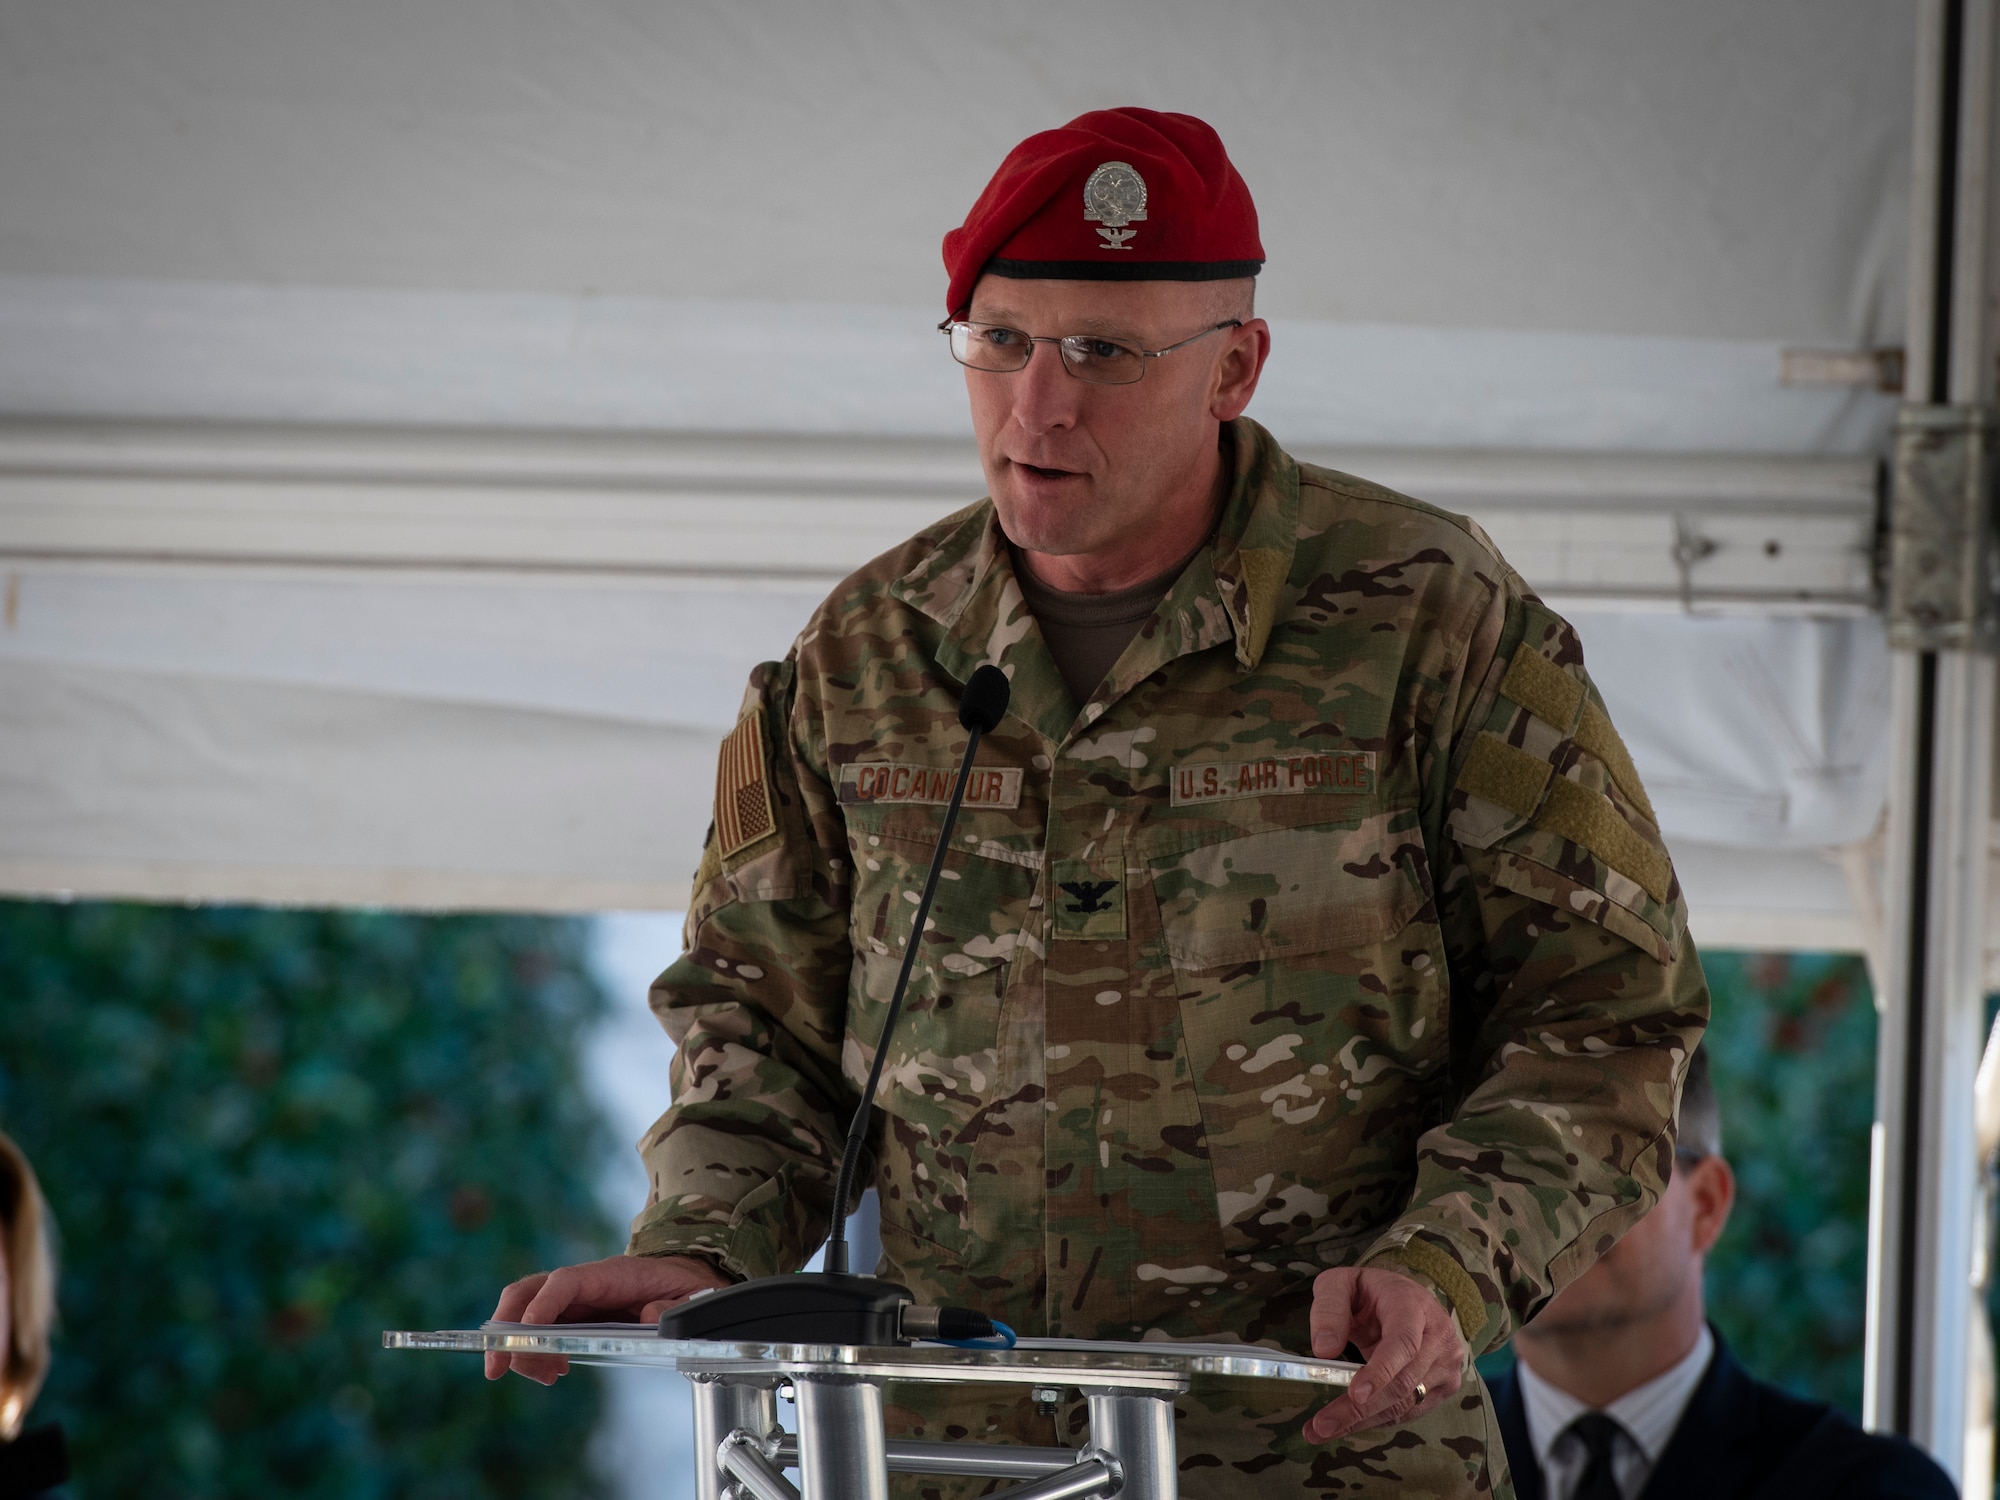 U.S. Air Force Col. Spencer Cocanour, the vice commander of the 24th Special Operations Wing, gives remarks during a ribbon cutting and dedication ceremony in Fort Walton Beach, Florida, Jan. 11, 2018.